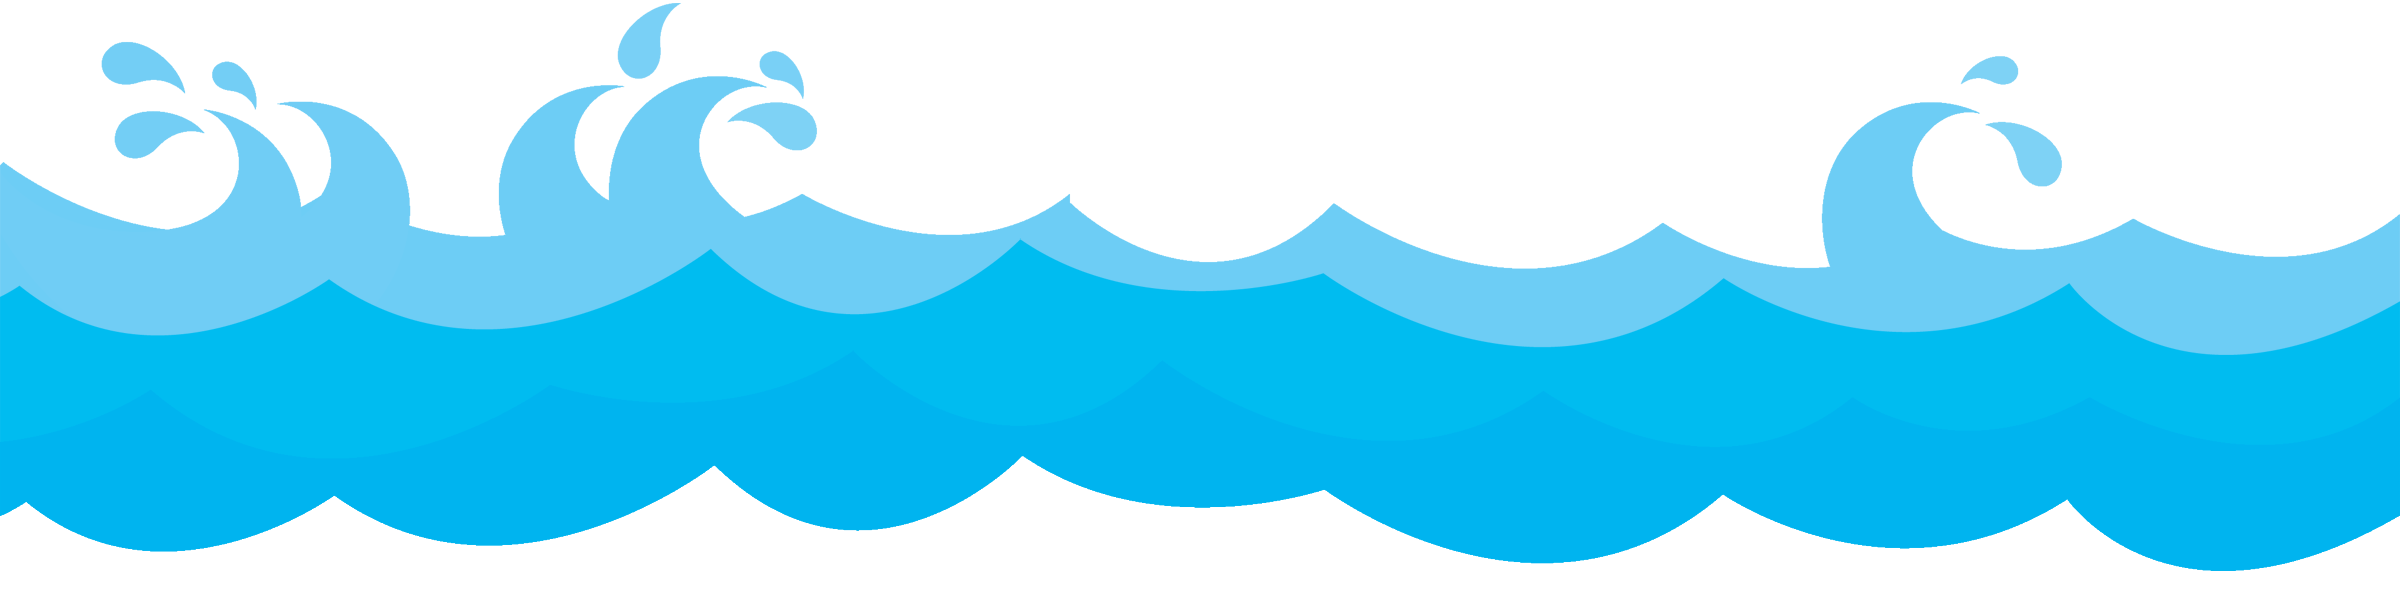 Water Waves Vector Png Free Transparent Clipart Clipartkey Images